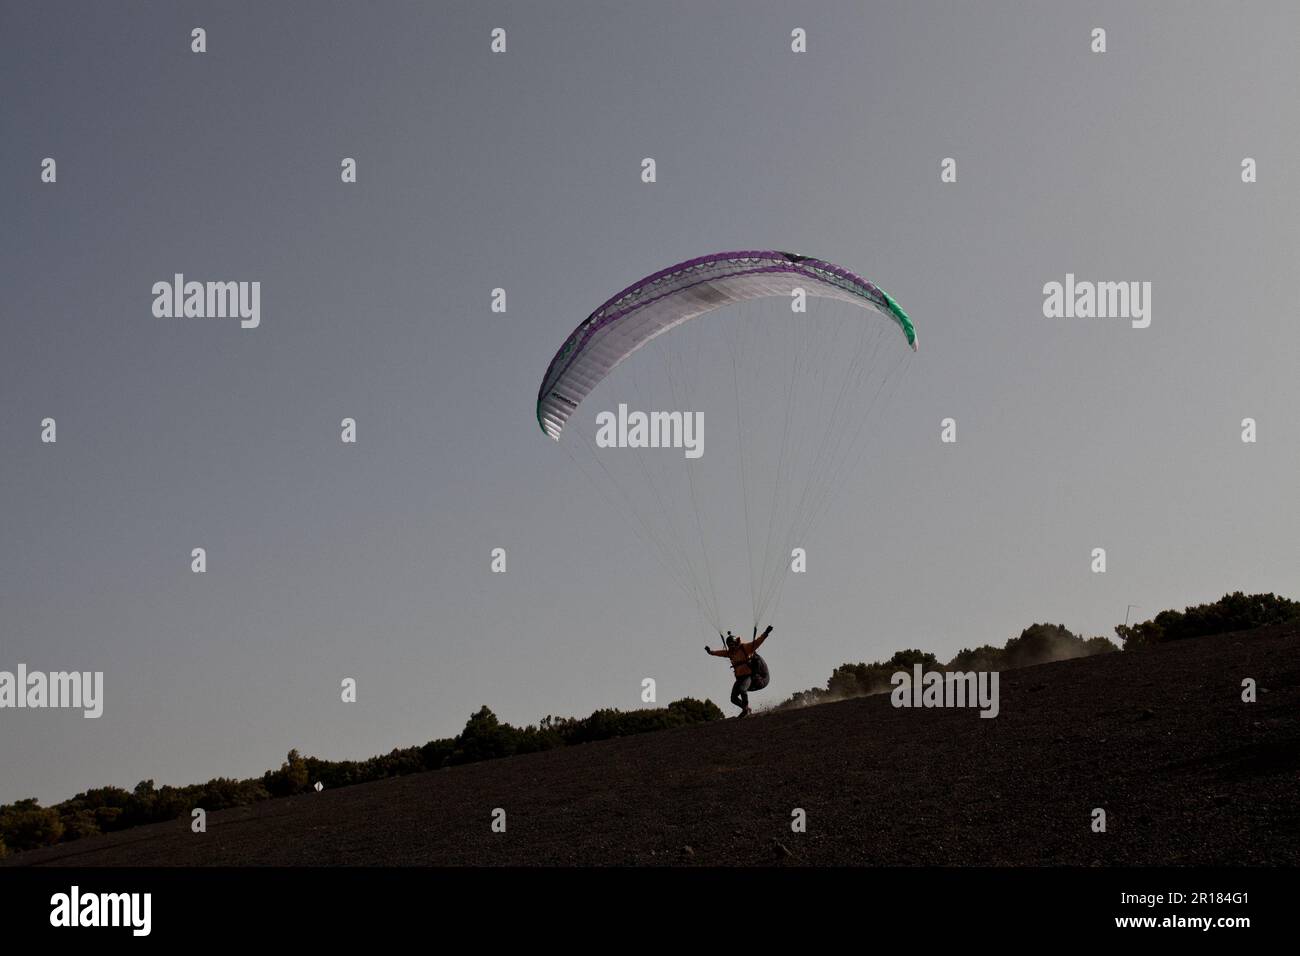 A Paraglider taking off at the cumbre de Dos Hermanas spot, in the El Hierro island, at the Canary Islands, Spain. Stock Photo